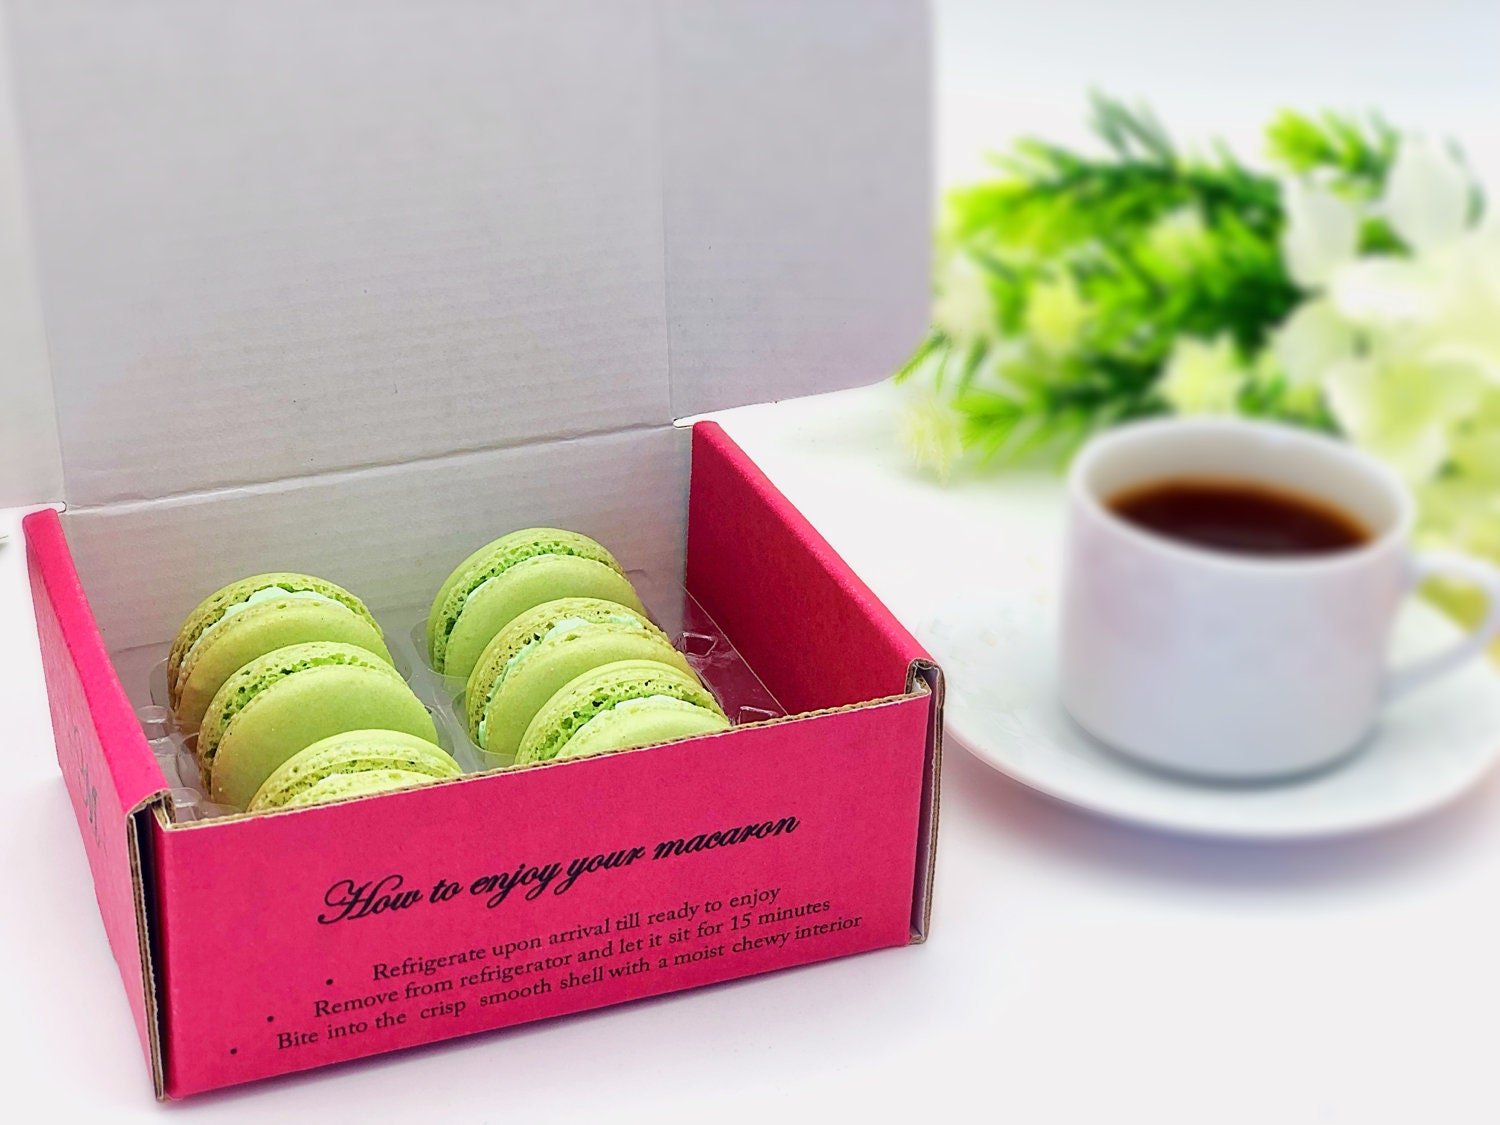 6 Pack apple macarons - Macaron Centrale